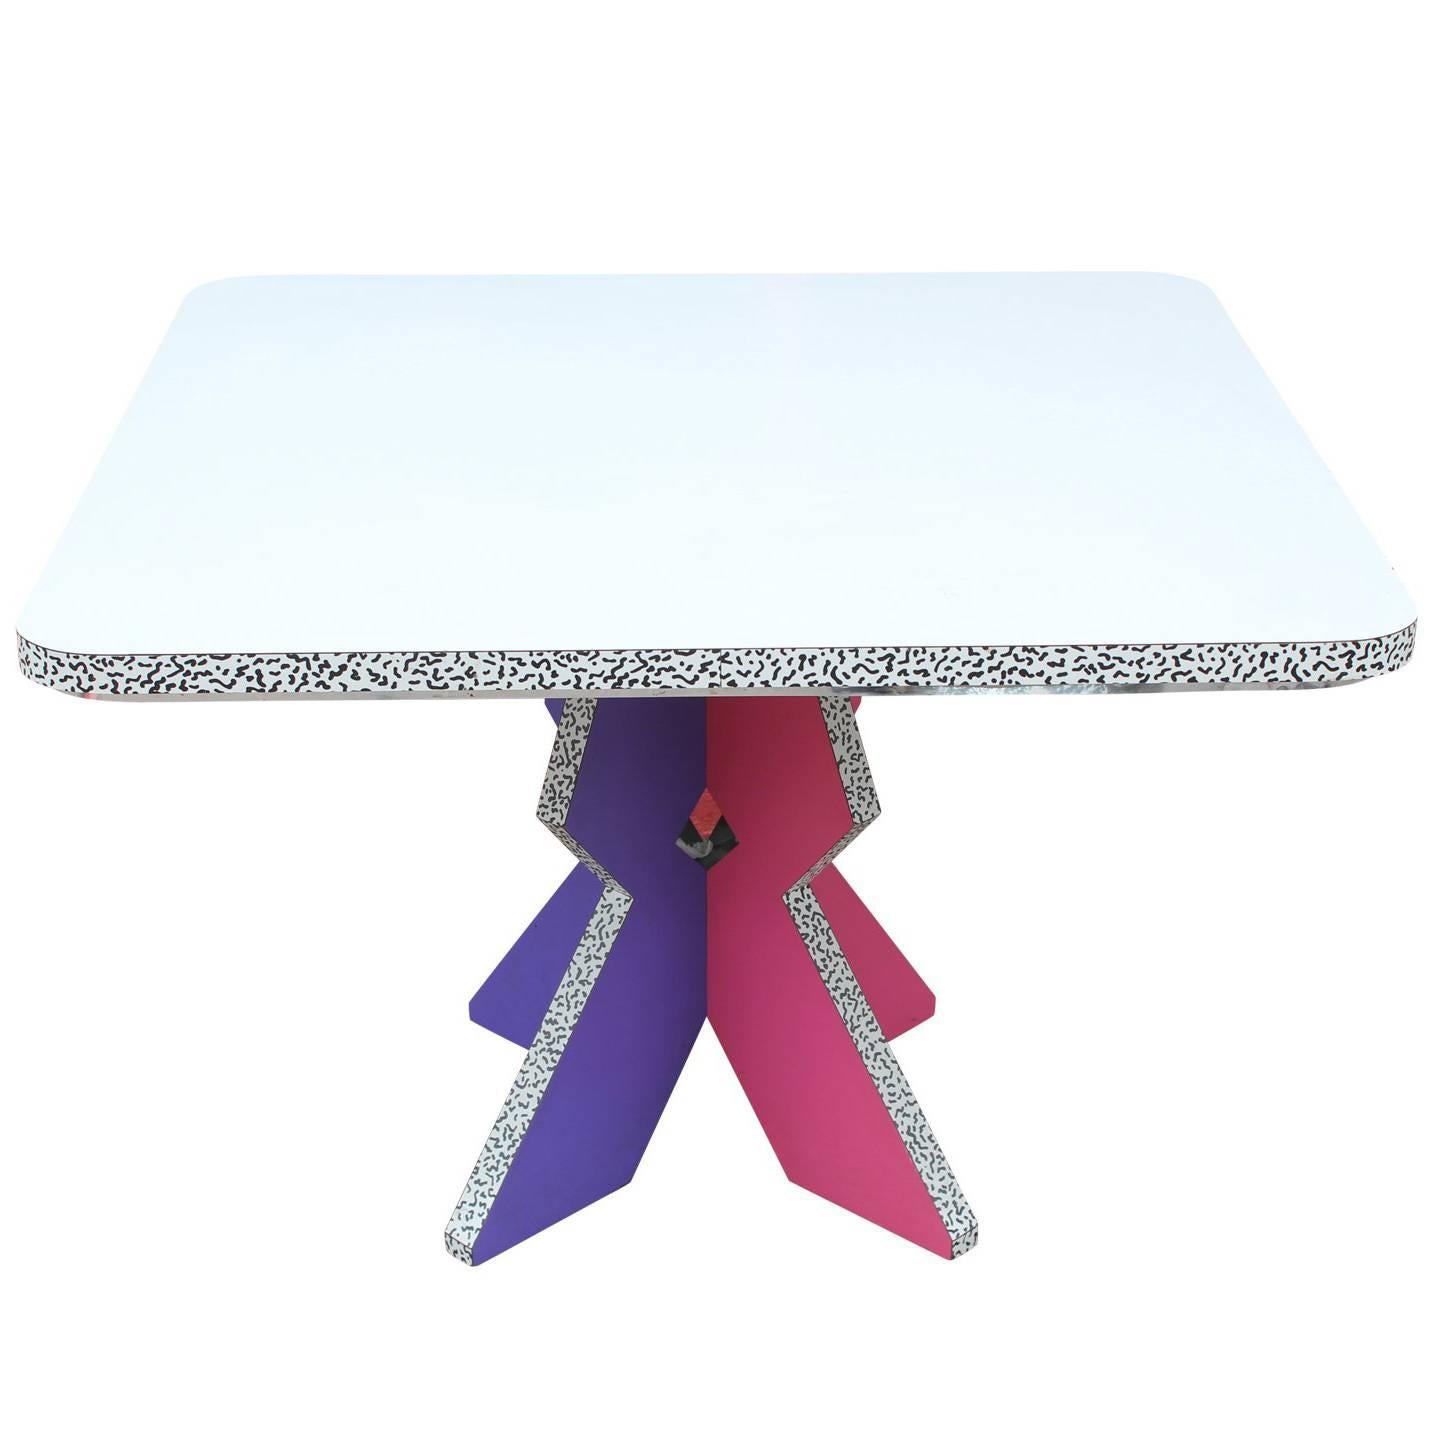 Modern Ettore Sottsass Style Square Memphis Table with Pink and Purple Legs